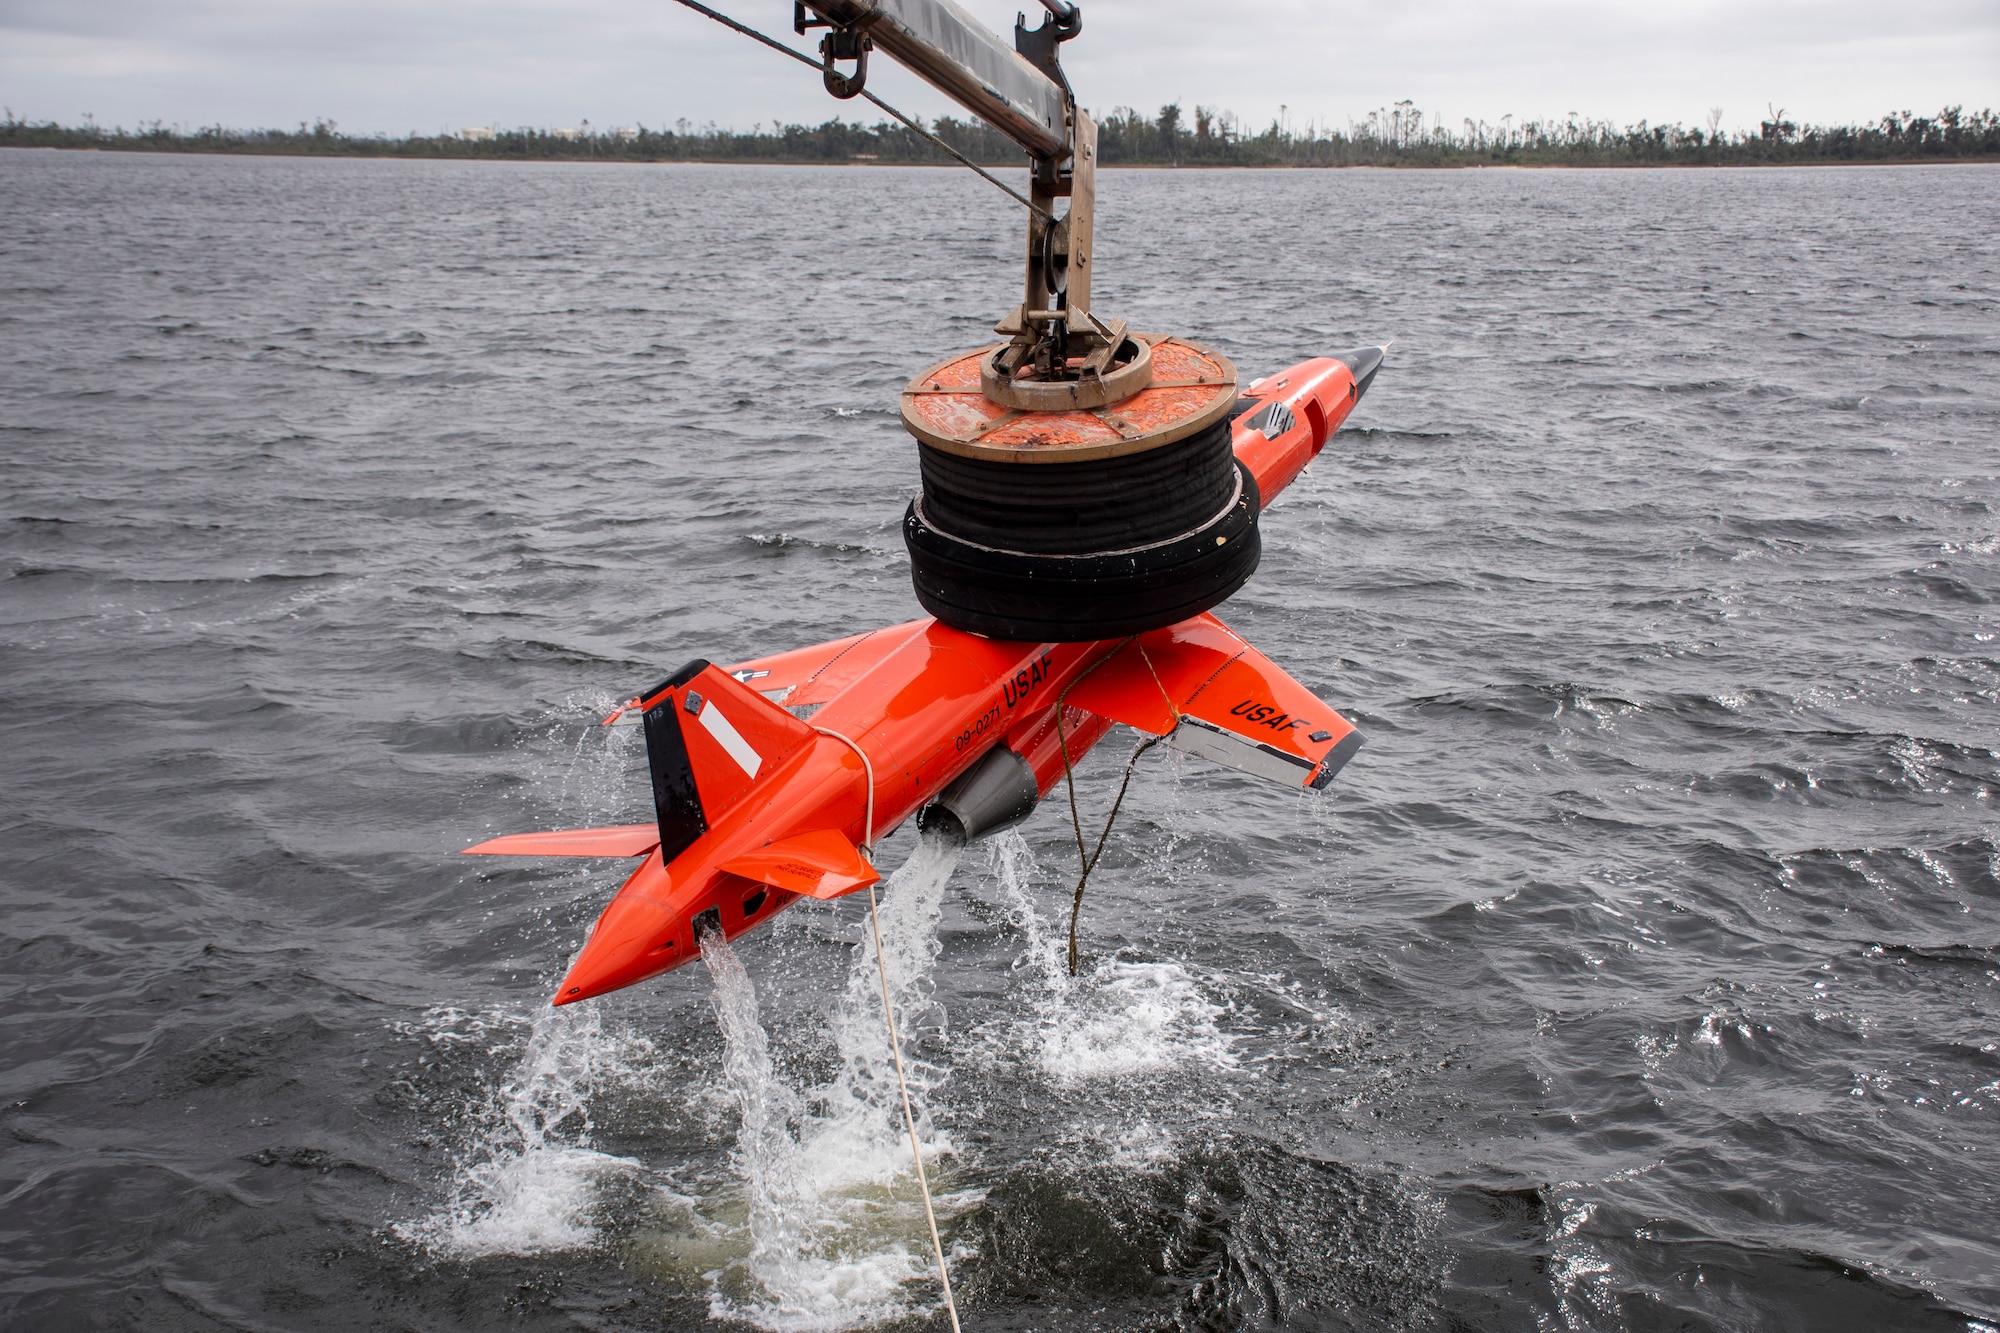 A BQM-167 subscale drone assigned to the 82nd Aerial Target Squadron, is lifted out of the water during a recovery demonstration in the East Bay near Tyndall Air Force Base, Florida, Dec. 17, 2021. Part of the 82nd ATRS’s responsibilities is to locate and extract all floating missiles, drones and aircraft debris within the 32 nautical-mile Waterborne Corridor, which helps keep the public safe and bring awareness to the mission. (U.S. Air Force photo by 1st Lt. Lindsey Heflin)